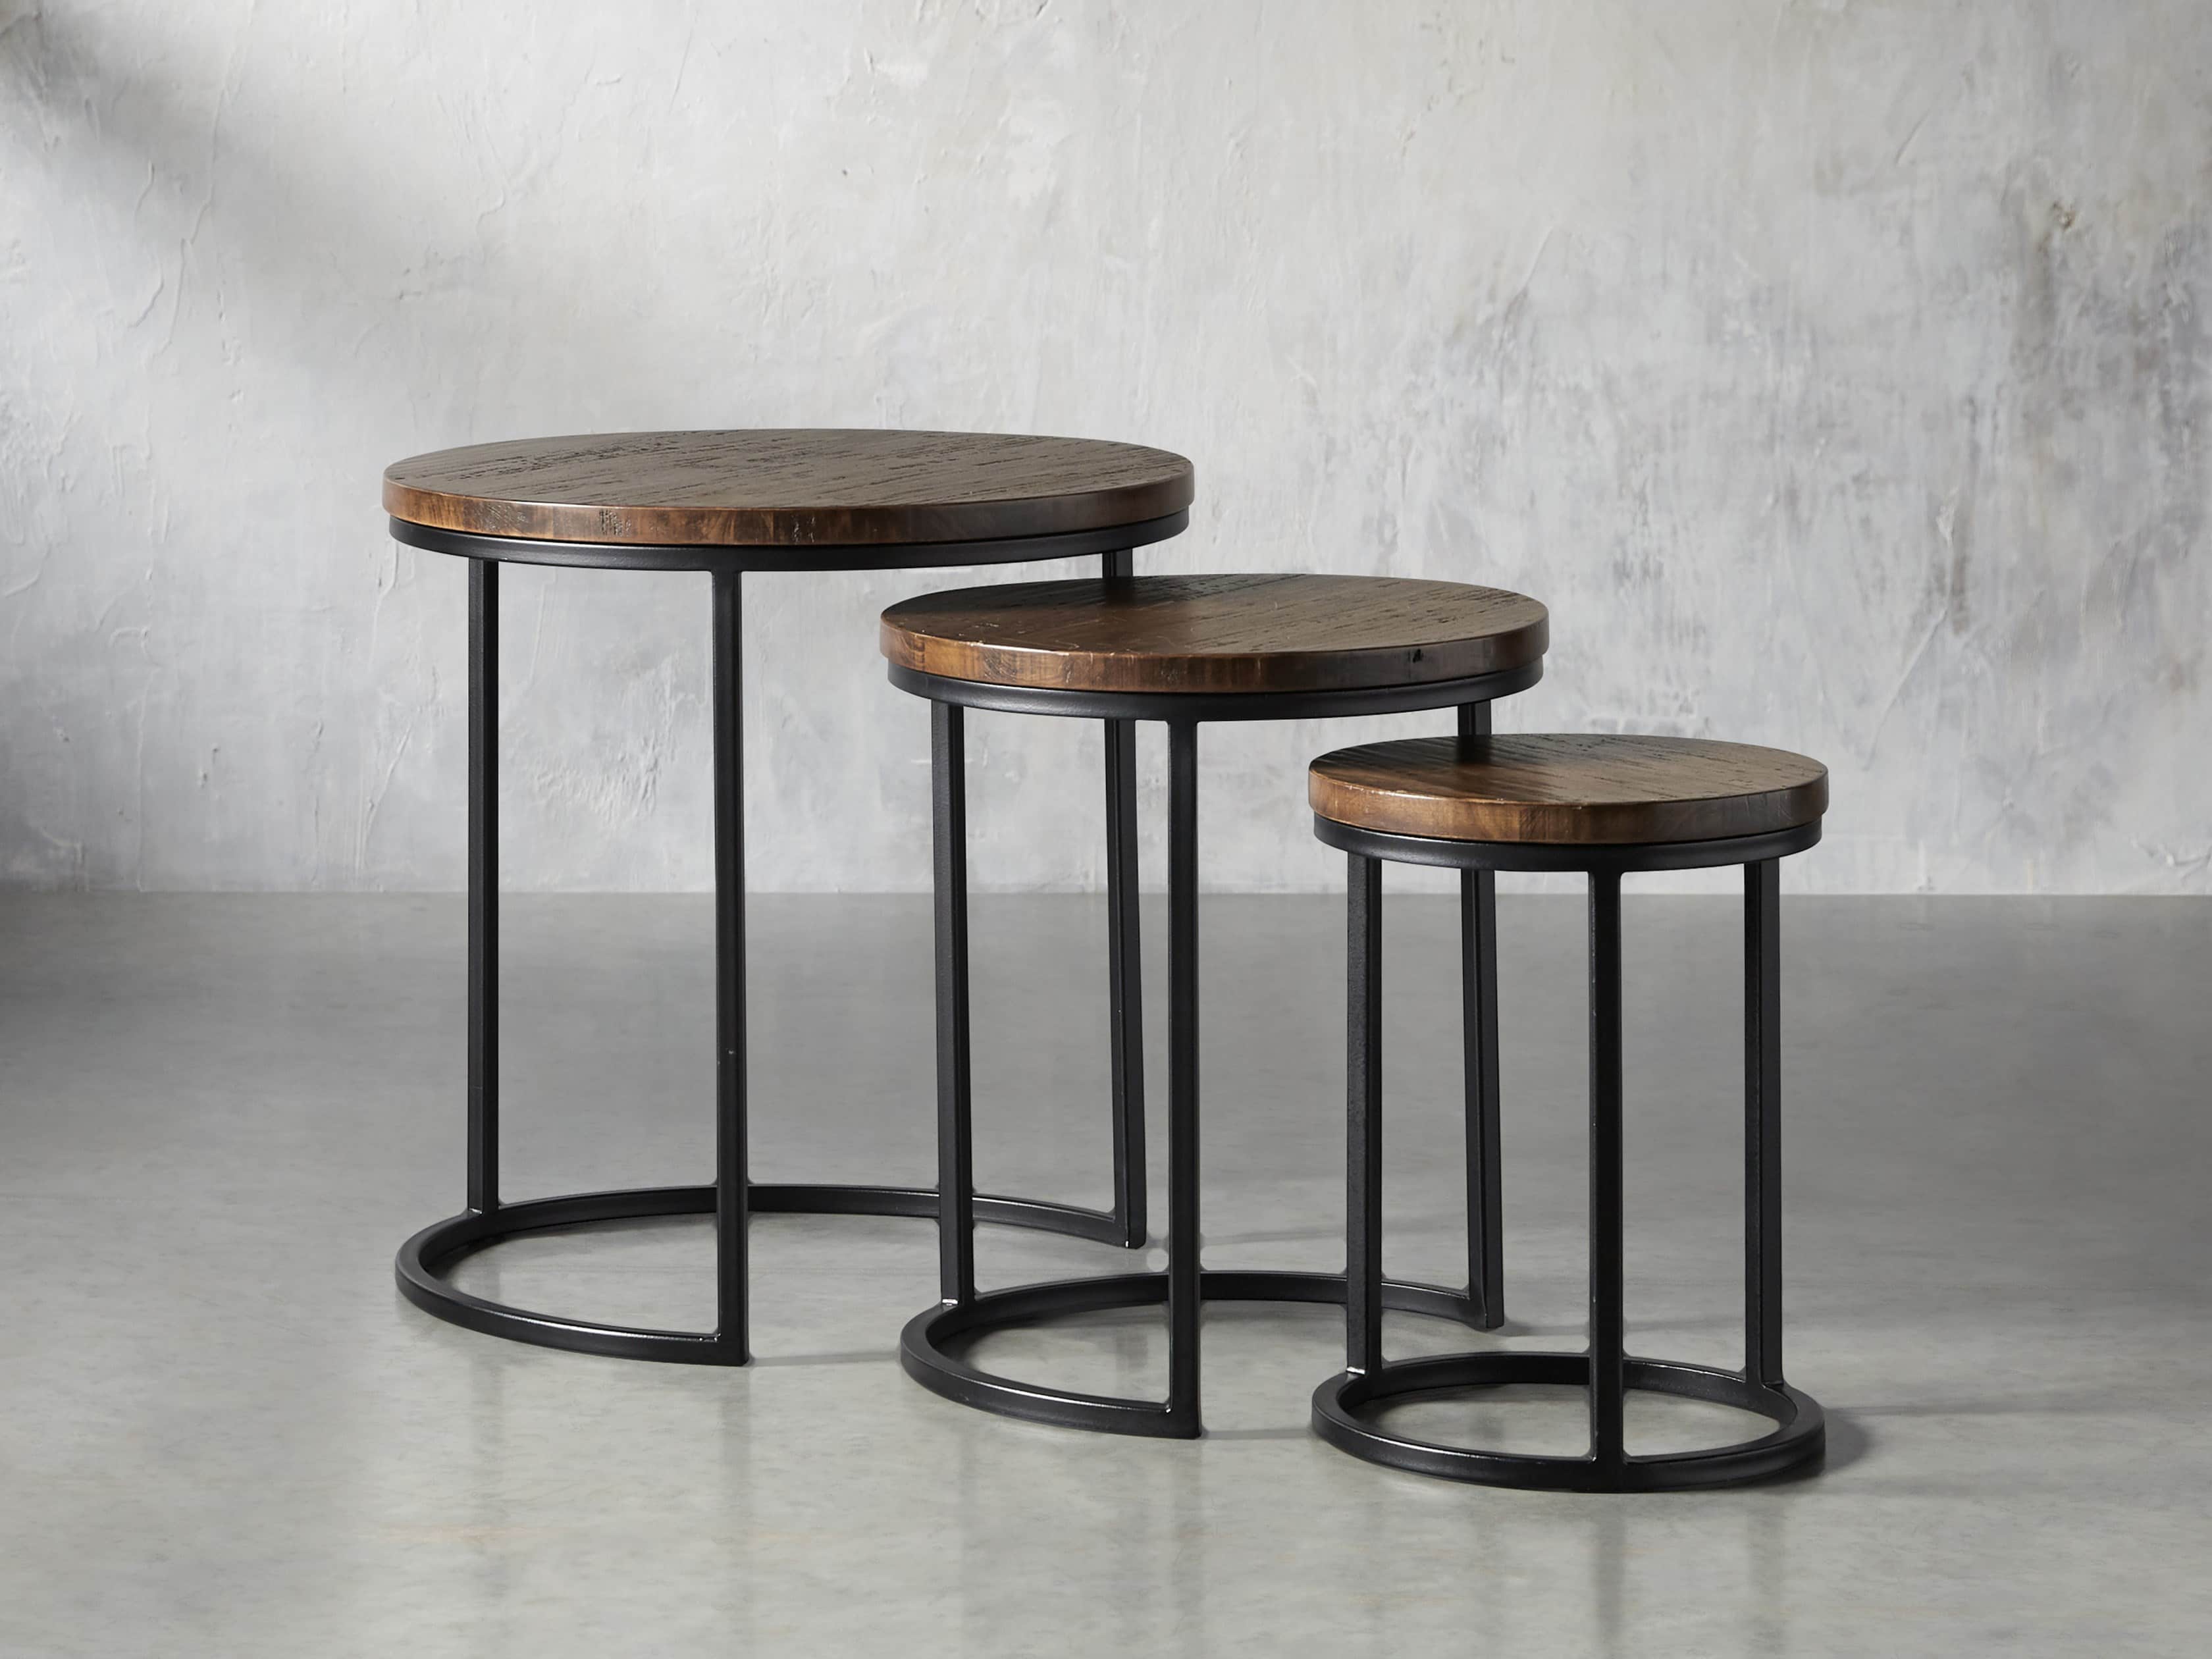 End Tables Side Table, Round Nesting Tables Wood